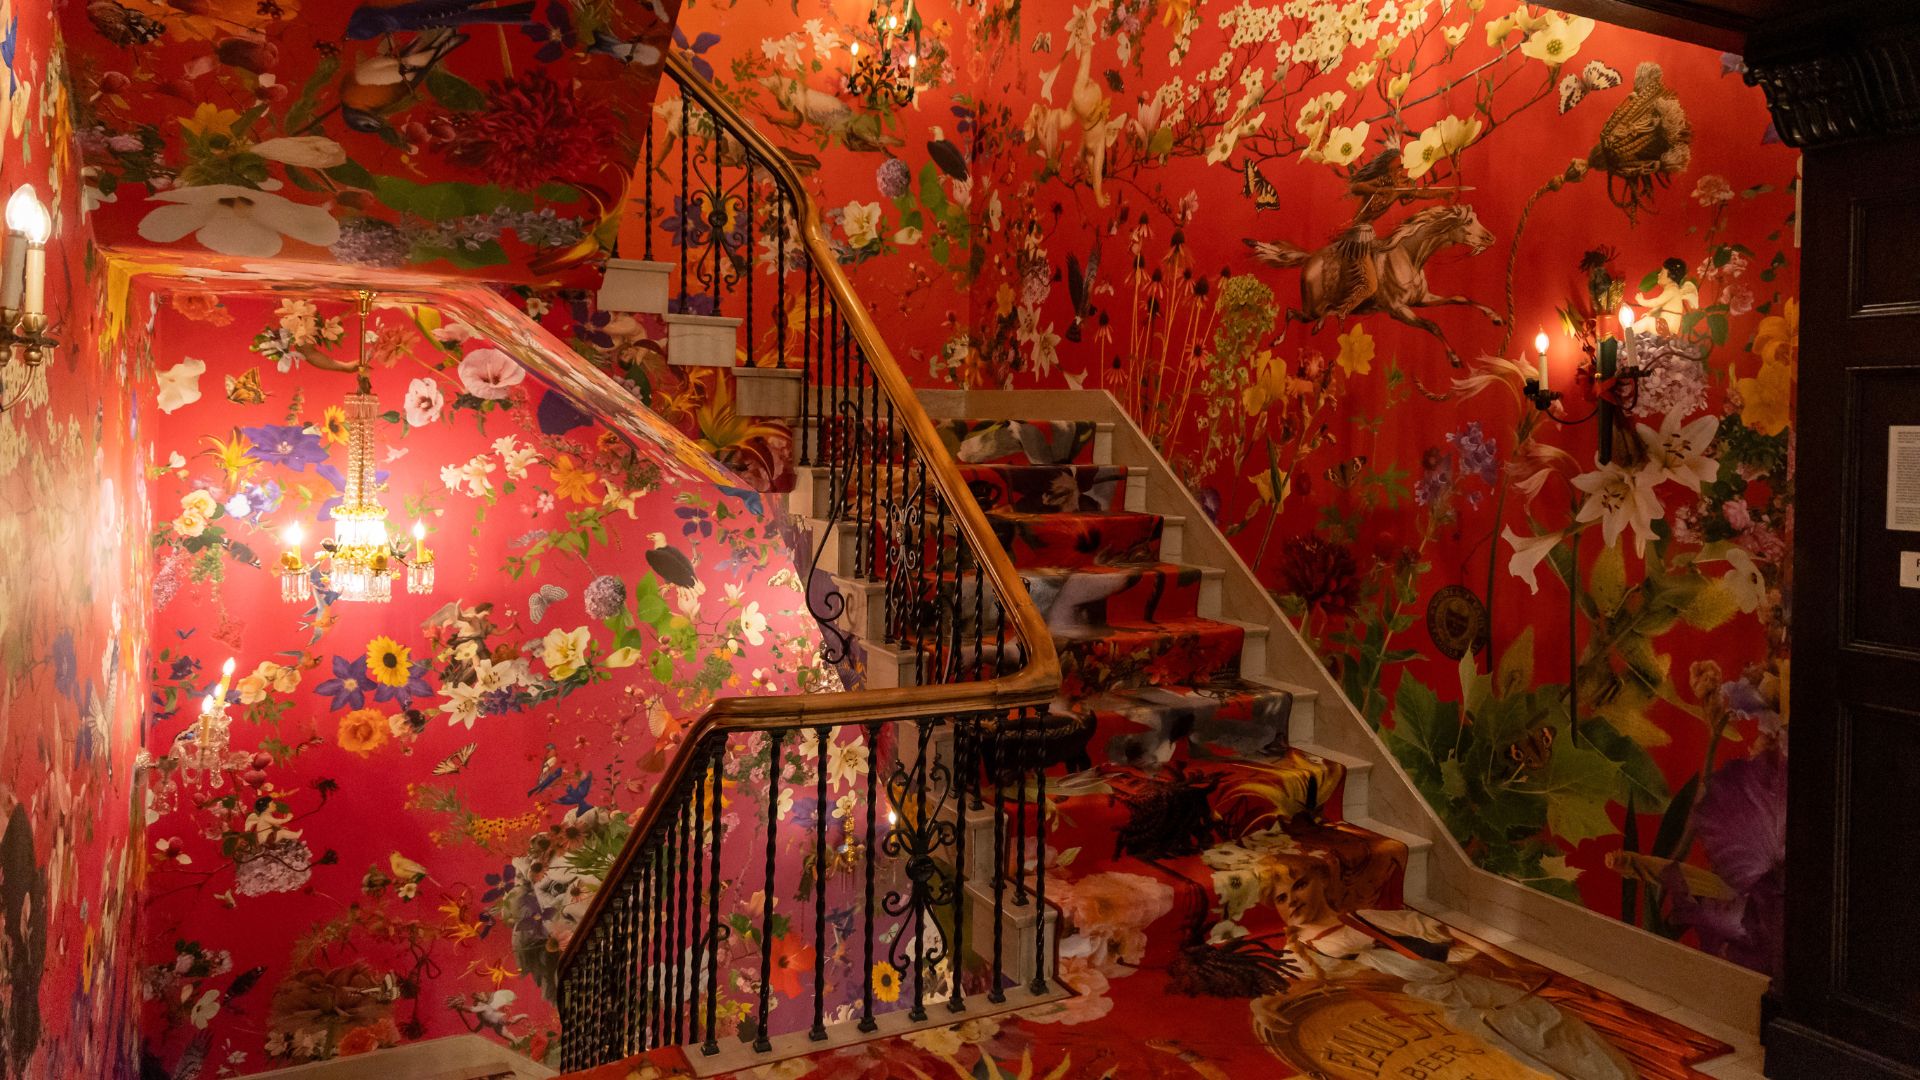 This grand staircase features vibrant, colorful wallpaper and carpet designed by Fallen Fruit.